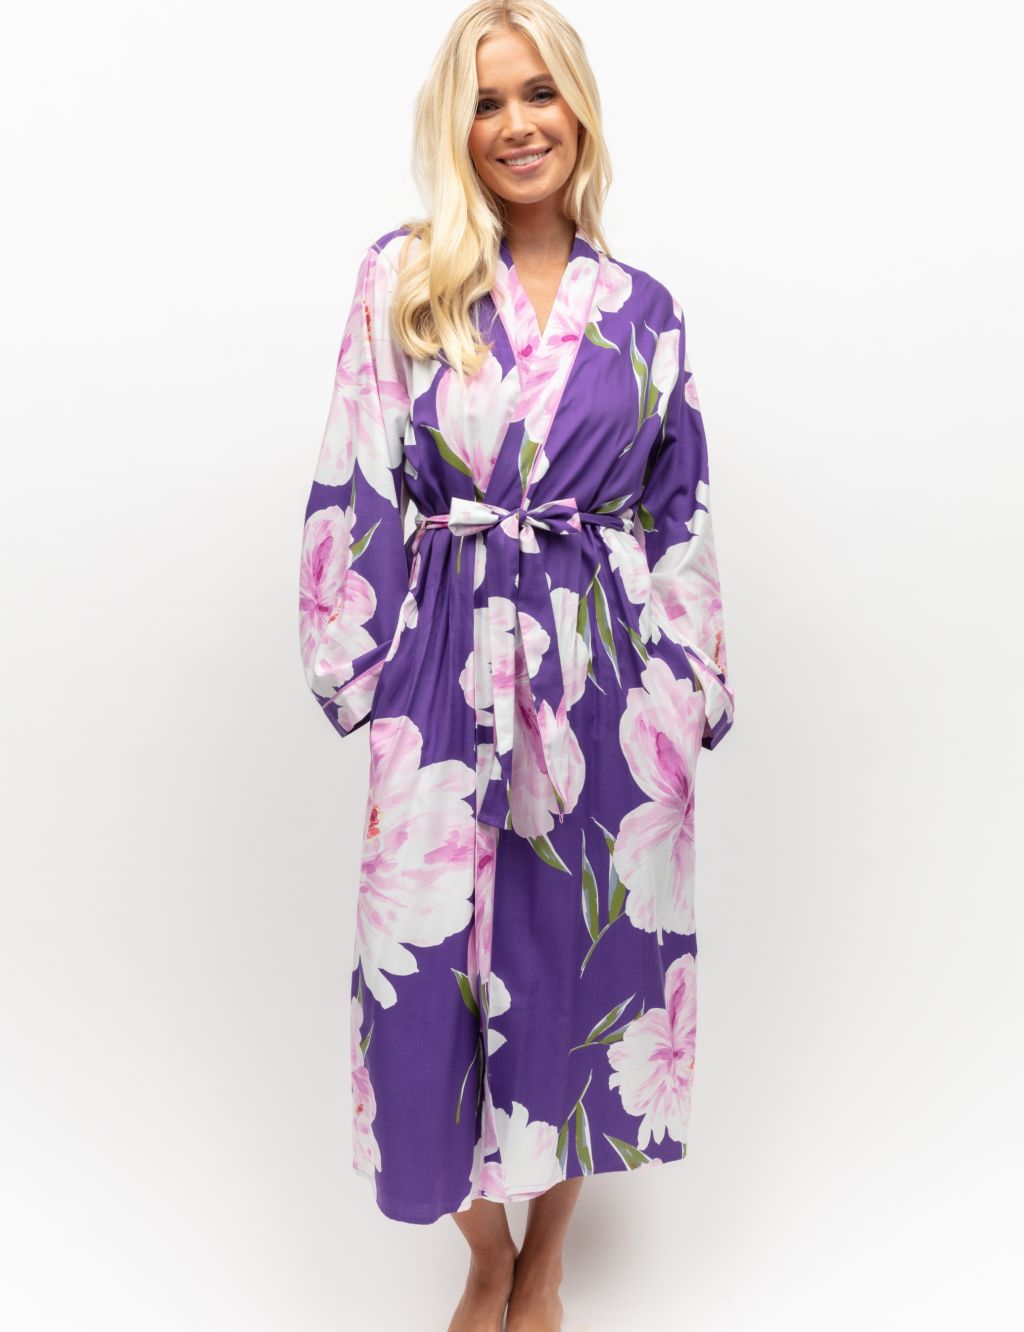 Cotton Modal Floral Dressing Gown image 1